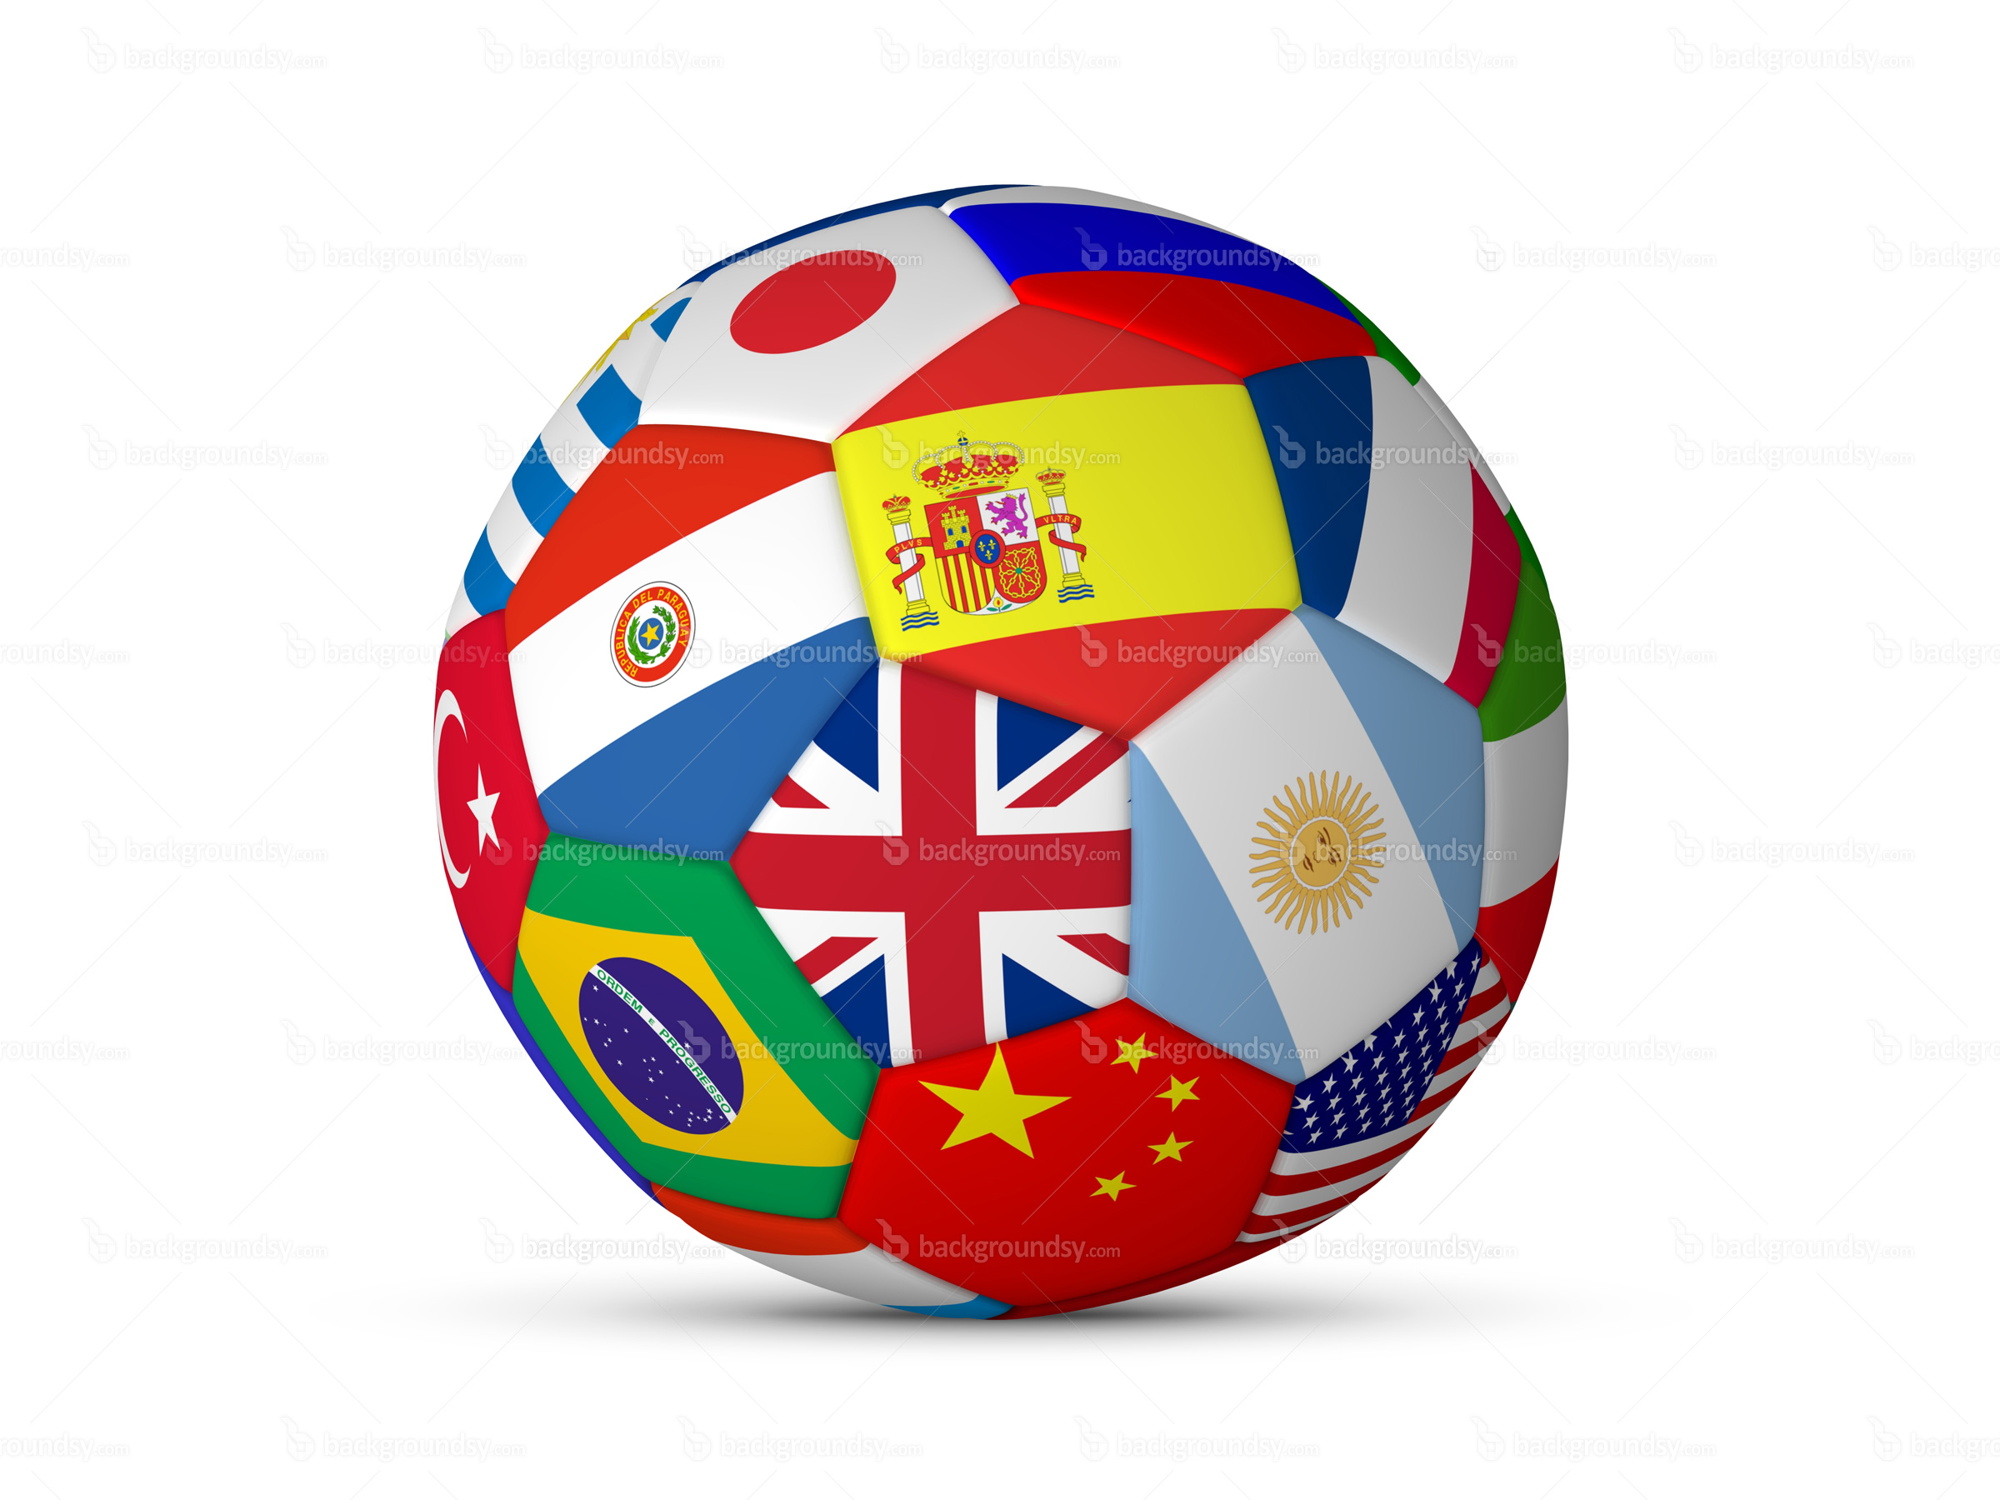 Football ball with flags  Backgroundsy.com